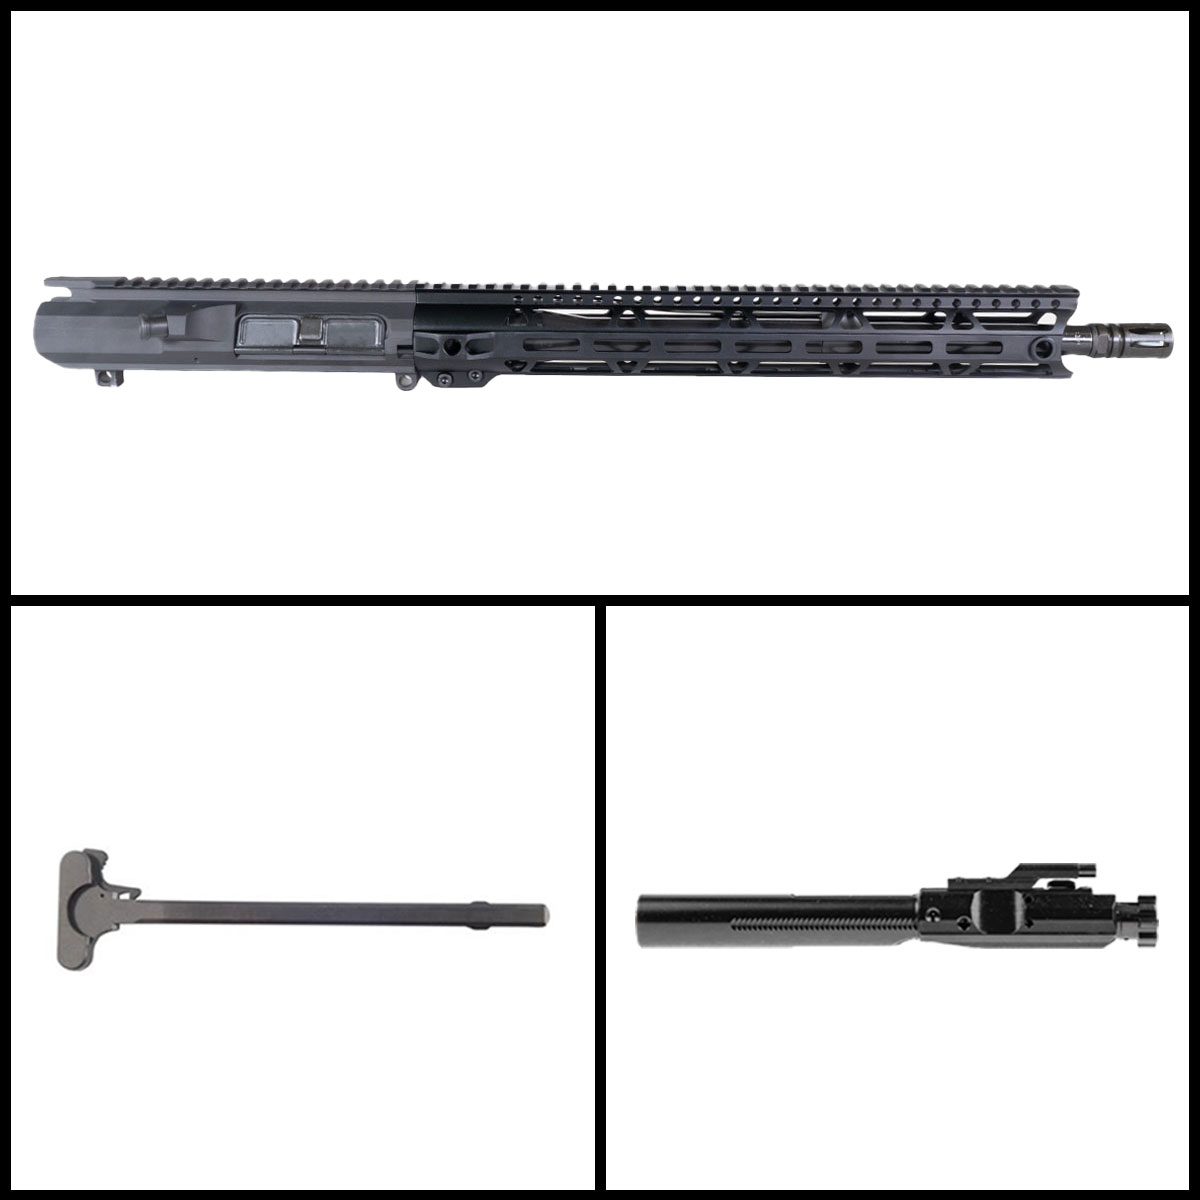 MMC 'Tarnished Expectations' 16-inch LR-308 .308 Win Phosphate Rifle Complete Upper Build